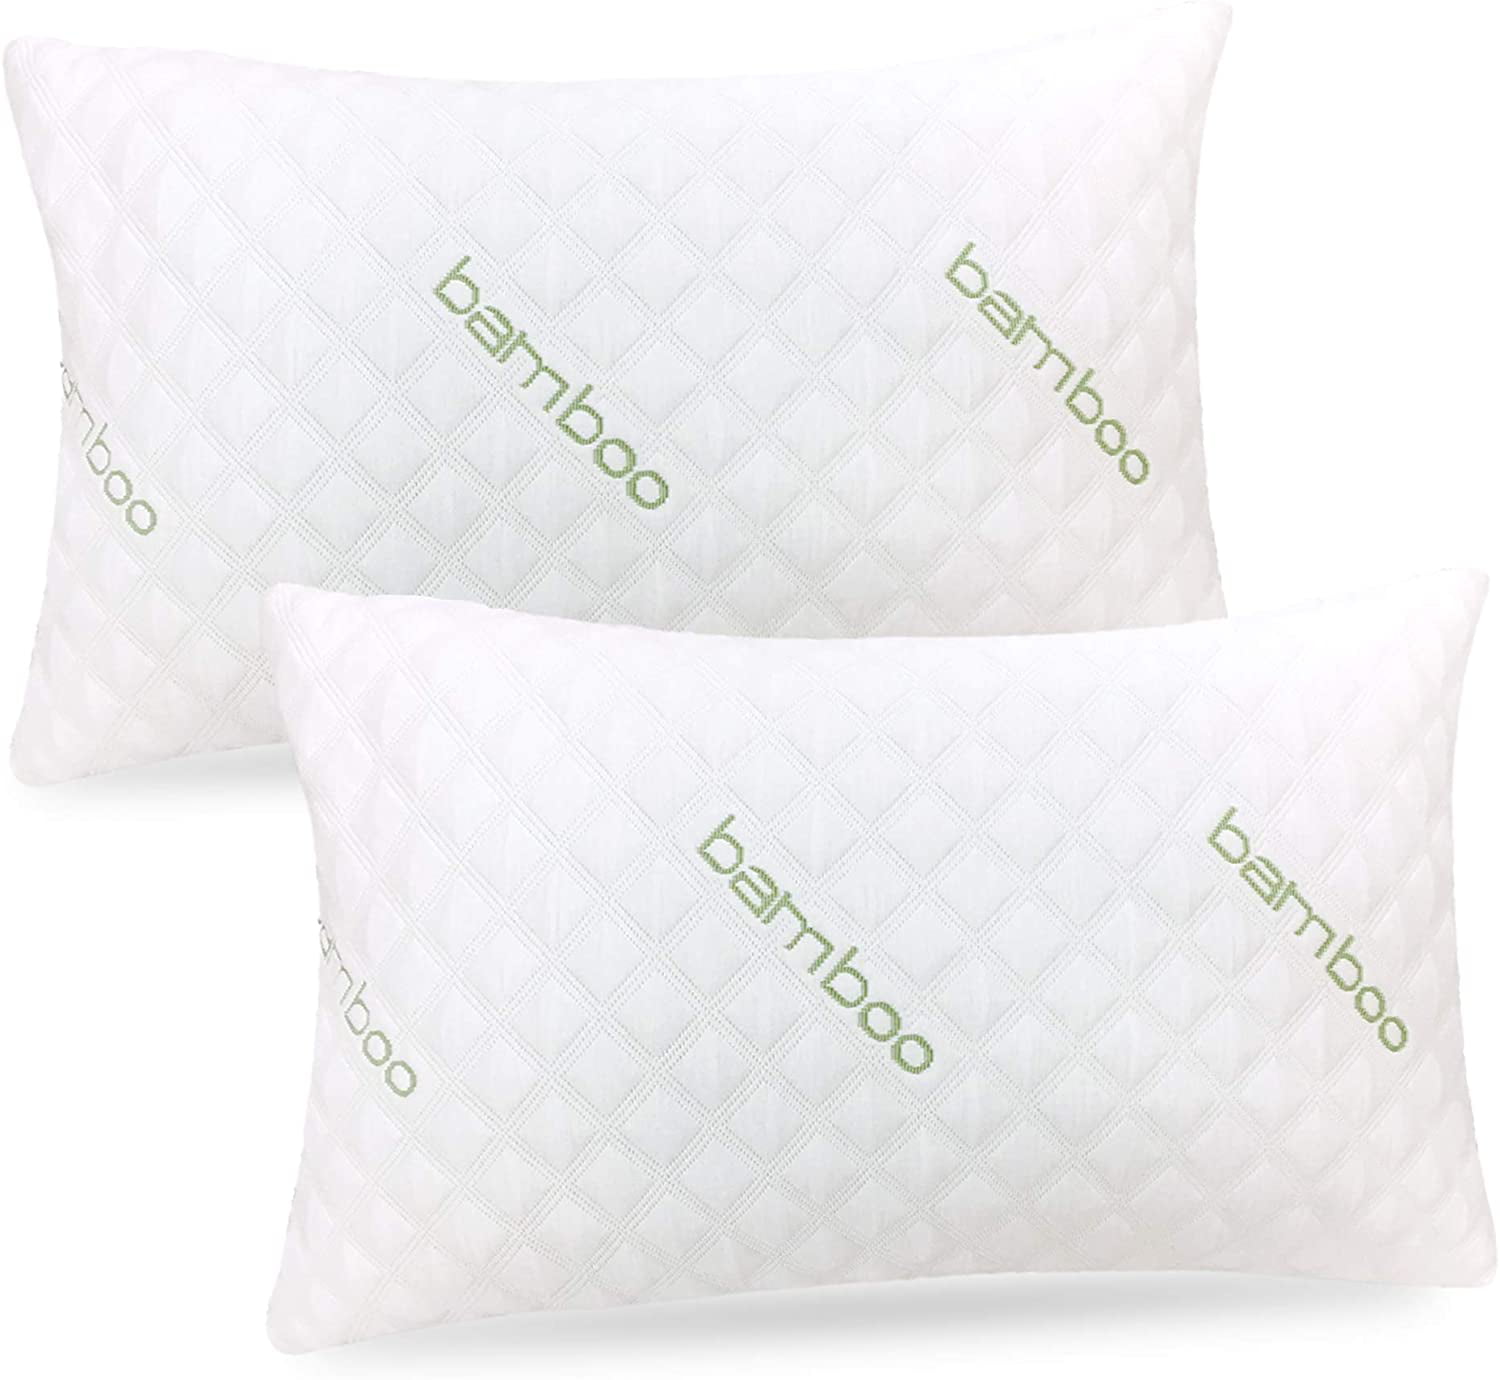 Premium Pillows for Sleeping with Washable Pillow Case King Adjustable 2-Pack Sleepsia Bamboo Pillow Shredded Memory Foam Pillow 